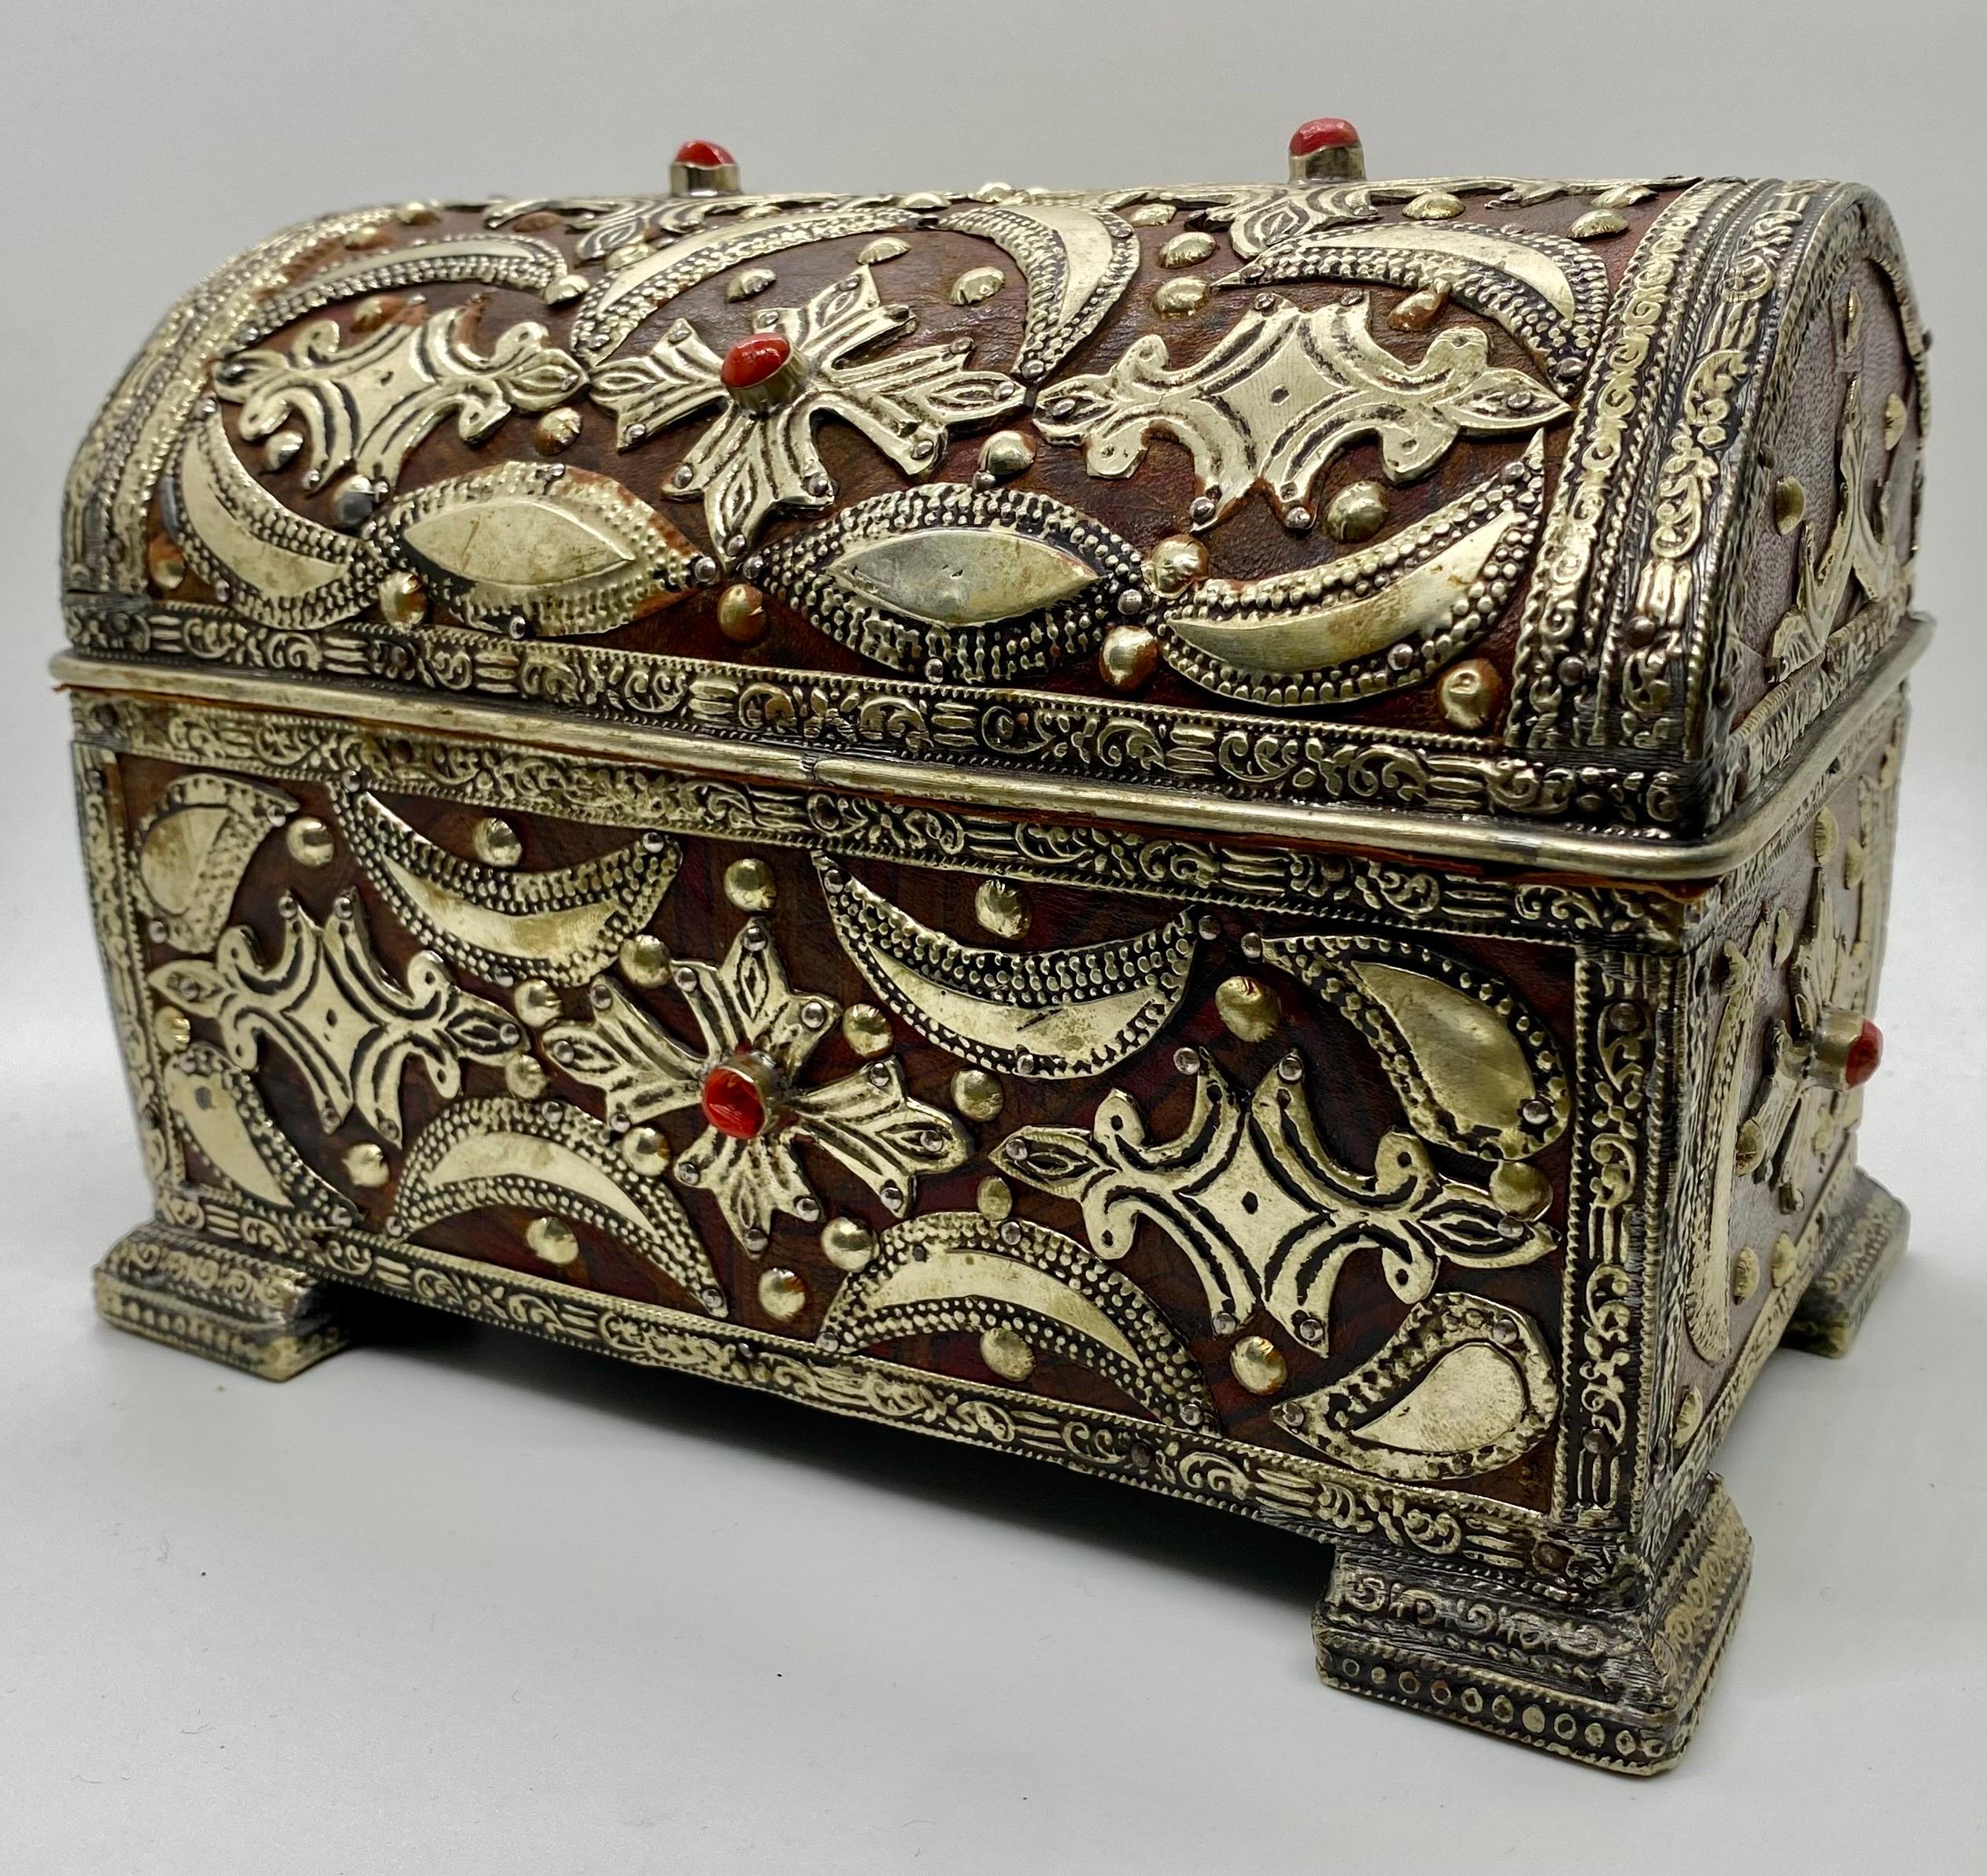 An exquisite French Gothic style jewelry box or small chest, a testament to the timeless allure of craftsmanship. Adorned with intricate brass inlay on genuine leather, this box emanates an aura of sophistication and heritage. 
Adding a touch of